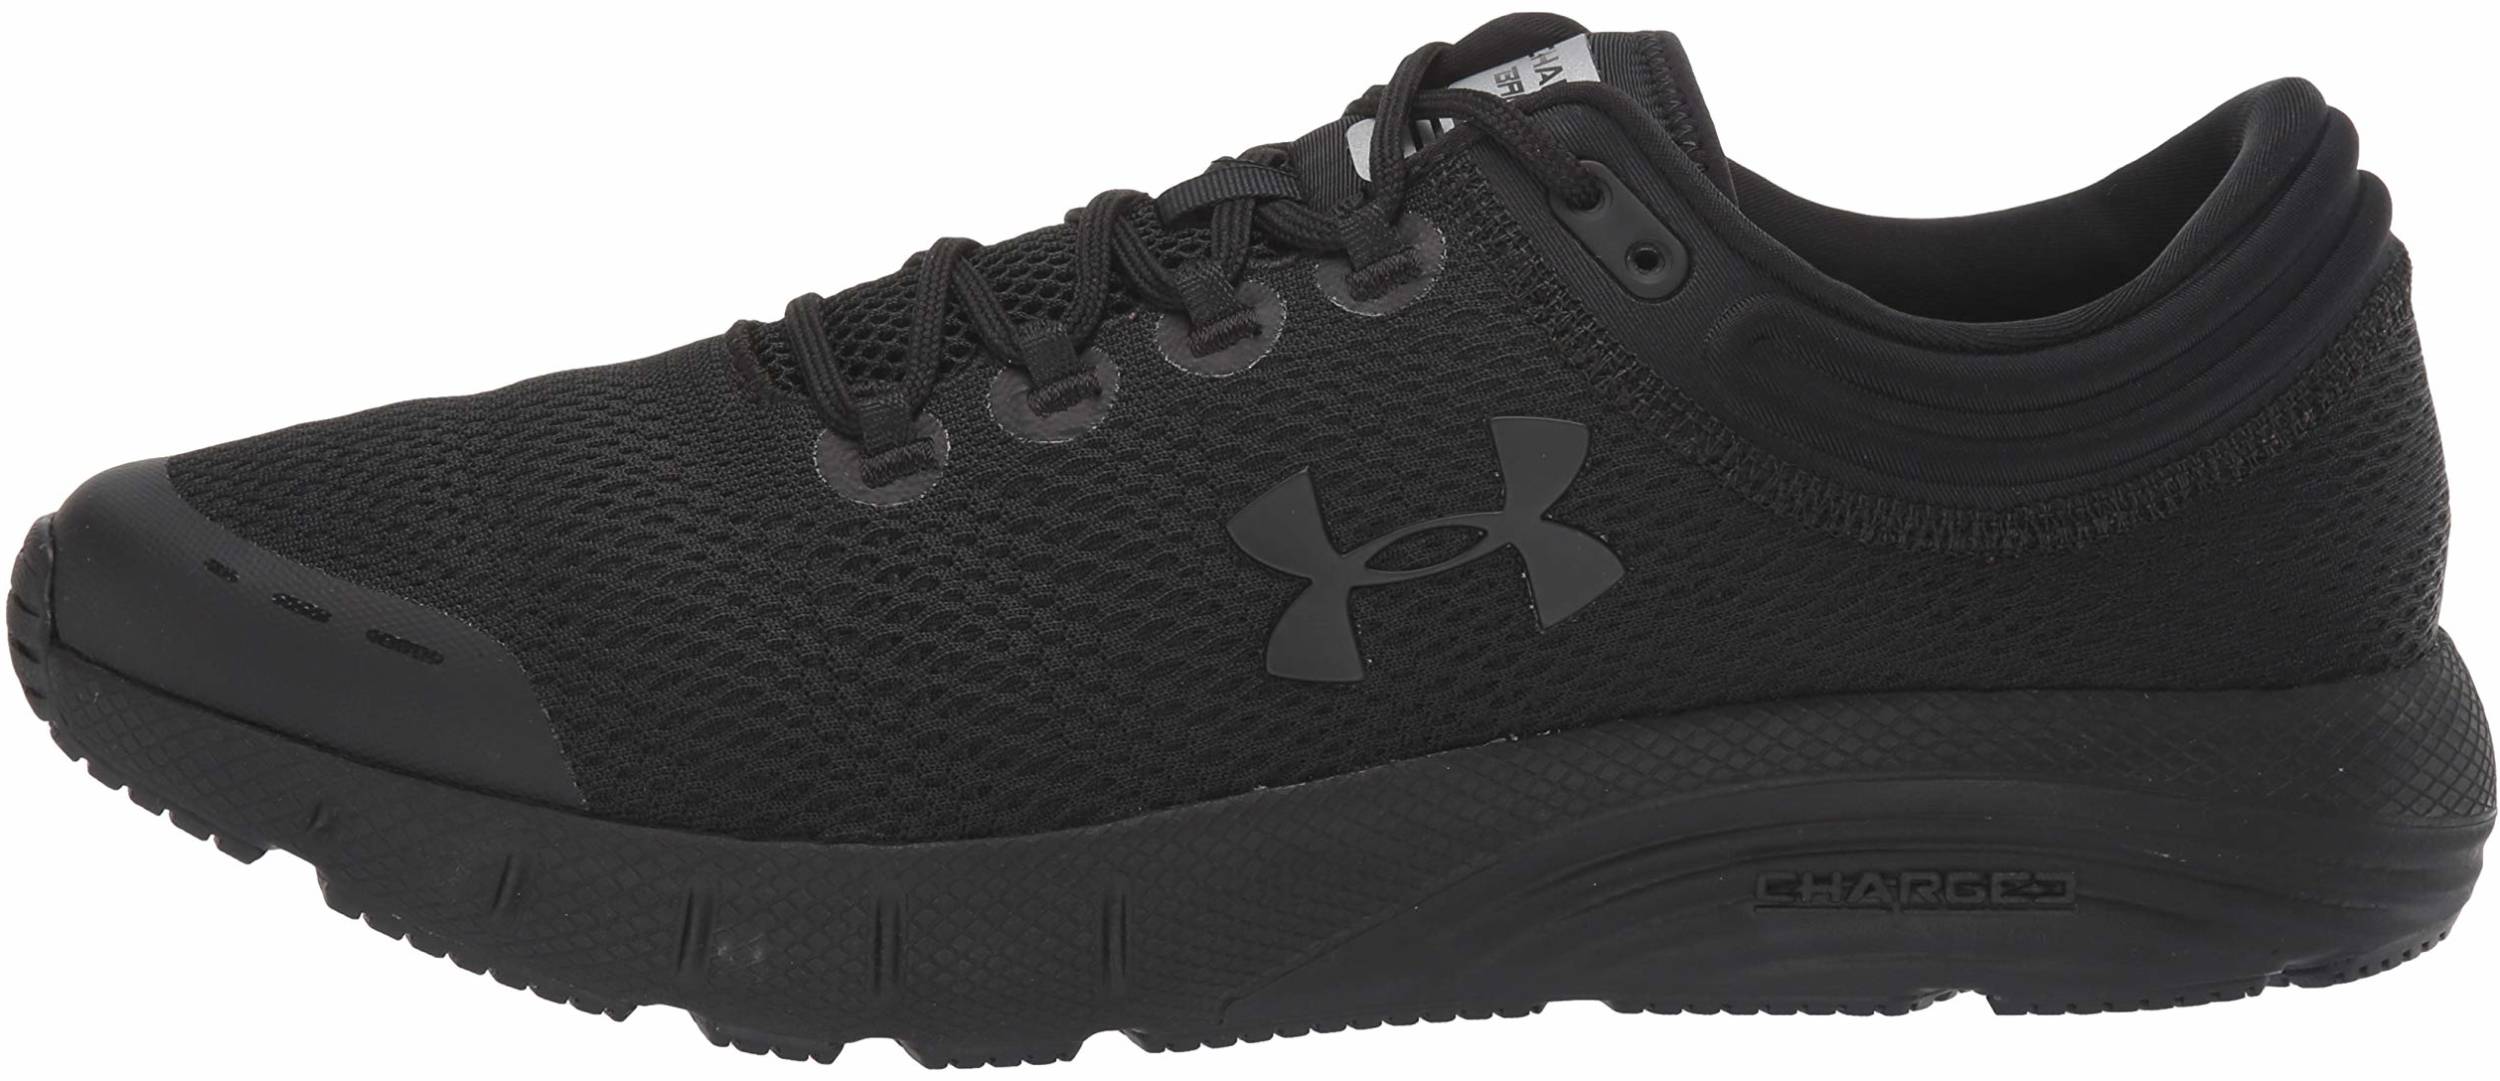 Black Sports Under Armour Mens Charged Bandit 5 Running Shoes Trainers 